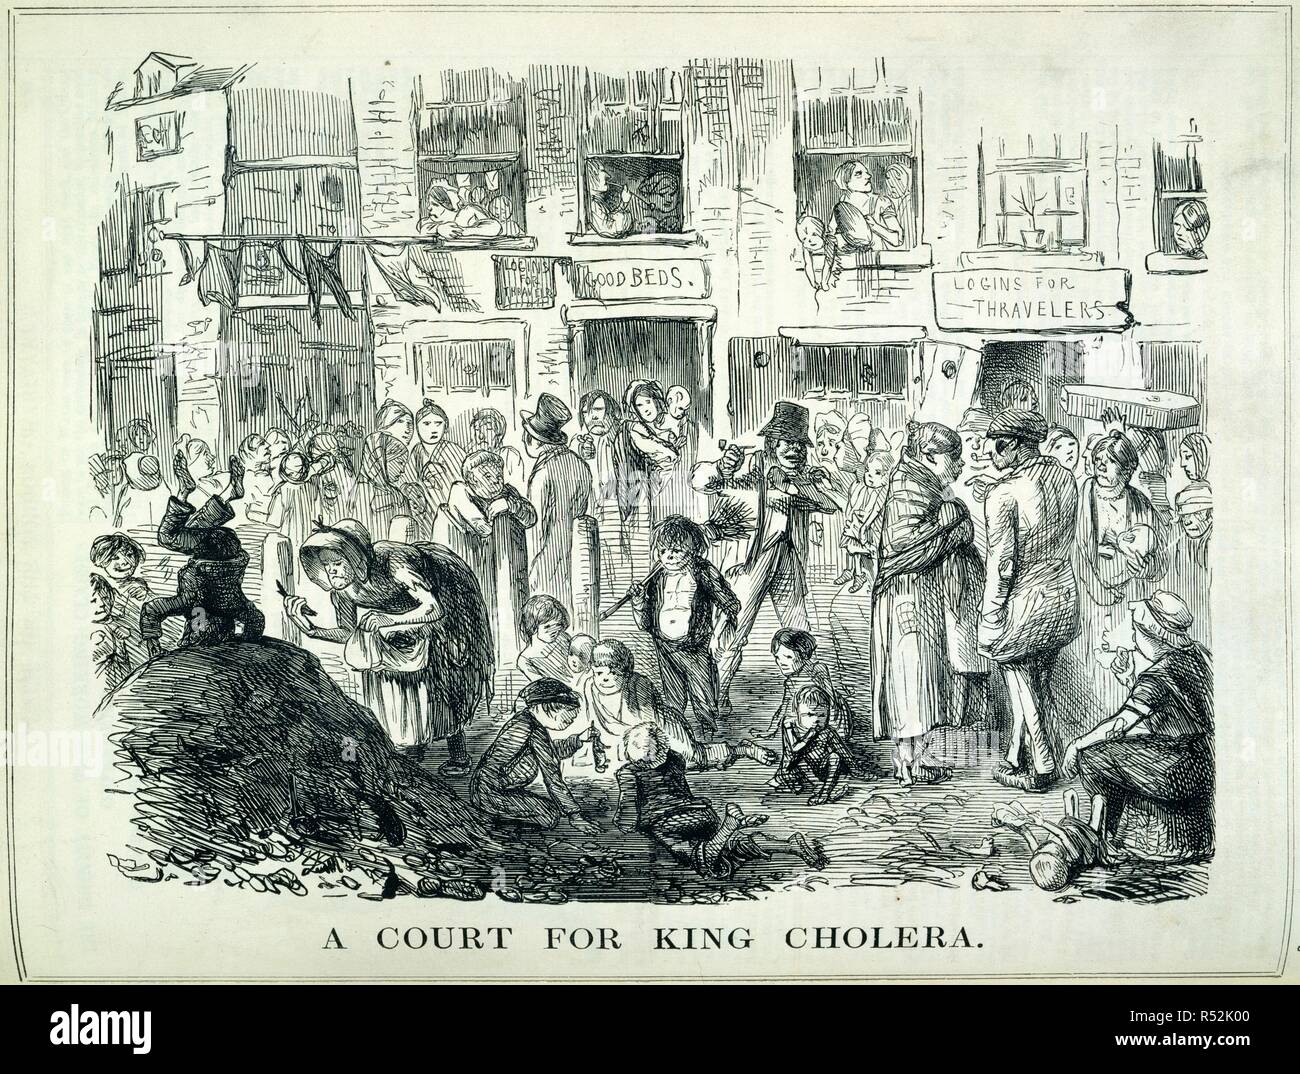 'A court for King Cholera.' . Punch, or the London Charivari. London, 25th September 1852. A court for King Cholera'. A crowd scene.  Image taken from Punch, or the London Charivari.  Originally published/produced in London, 25th September 1852. . Source: P.P.5270 volume 23, 139. Language: English. Stock Photo